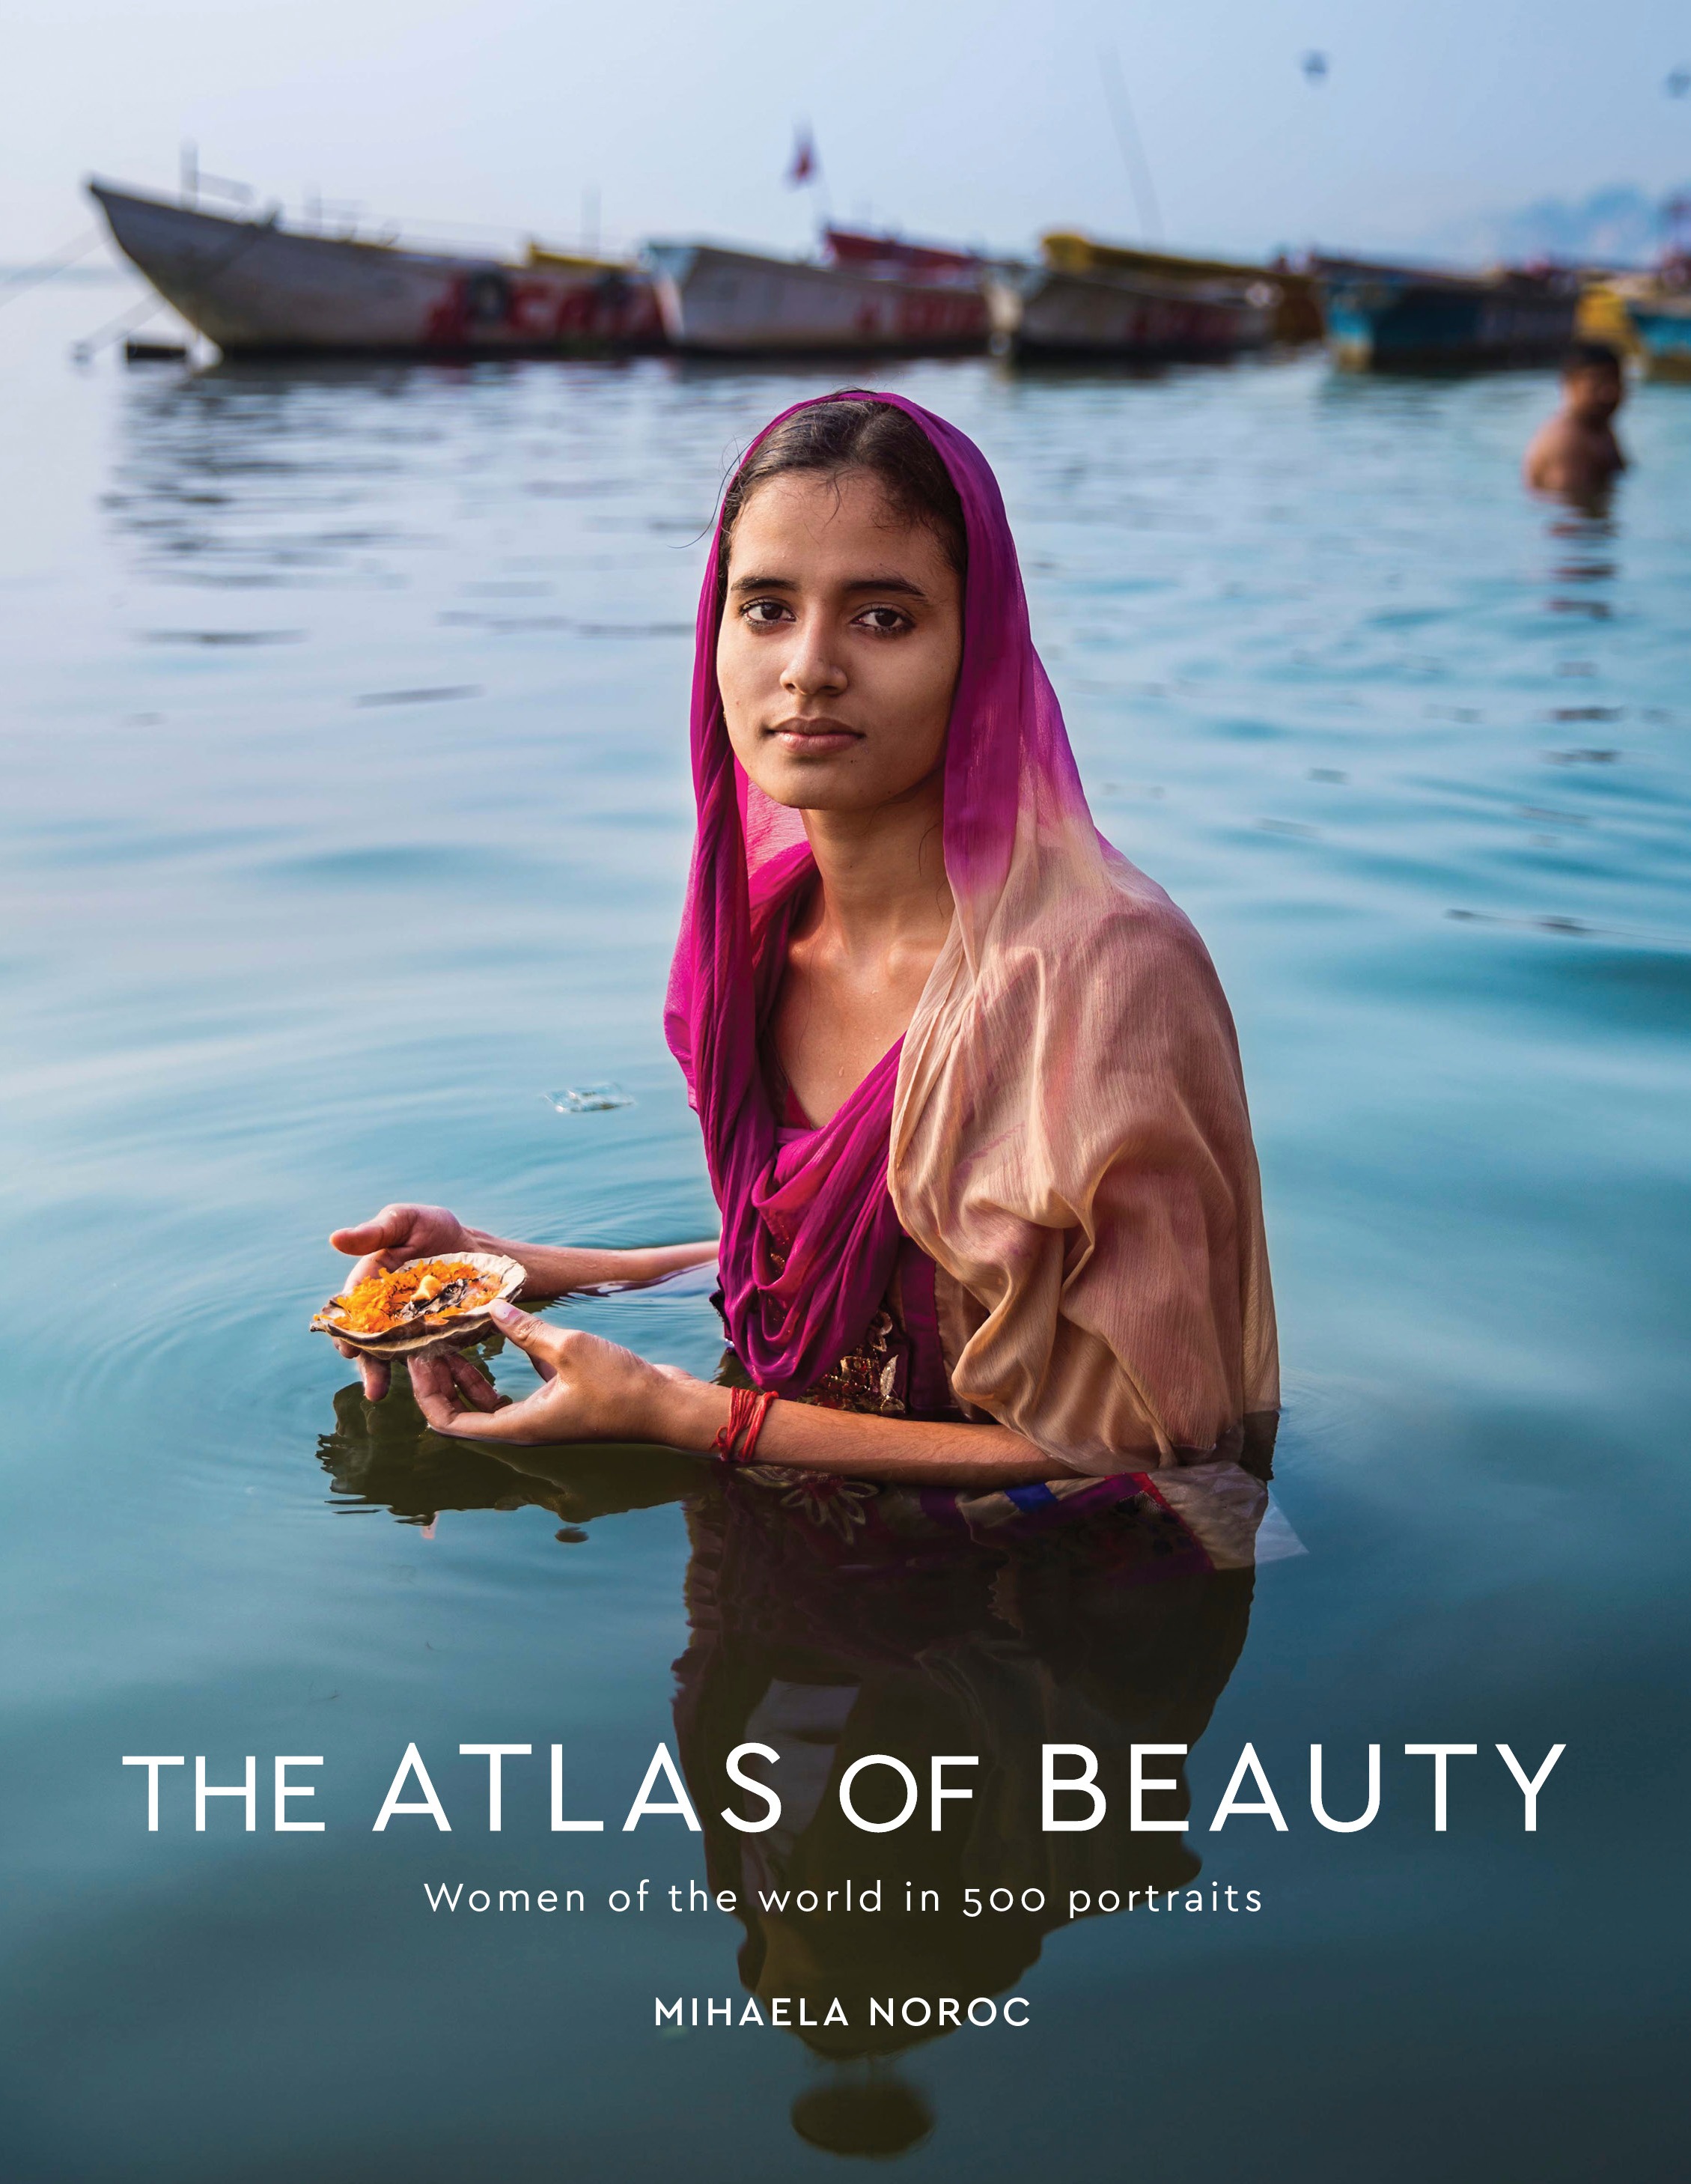 Brooklyn Book Launch: The Atlas of Beauty: Women of the World in 500 Portraits by Mihaela Noroc